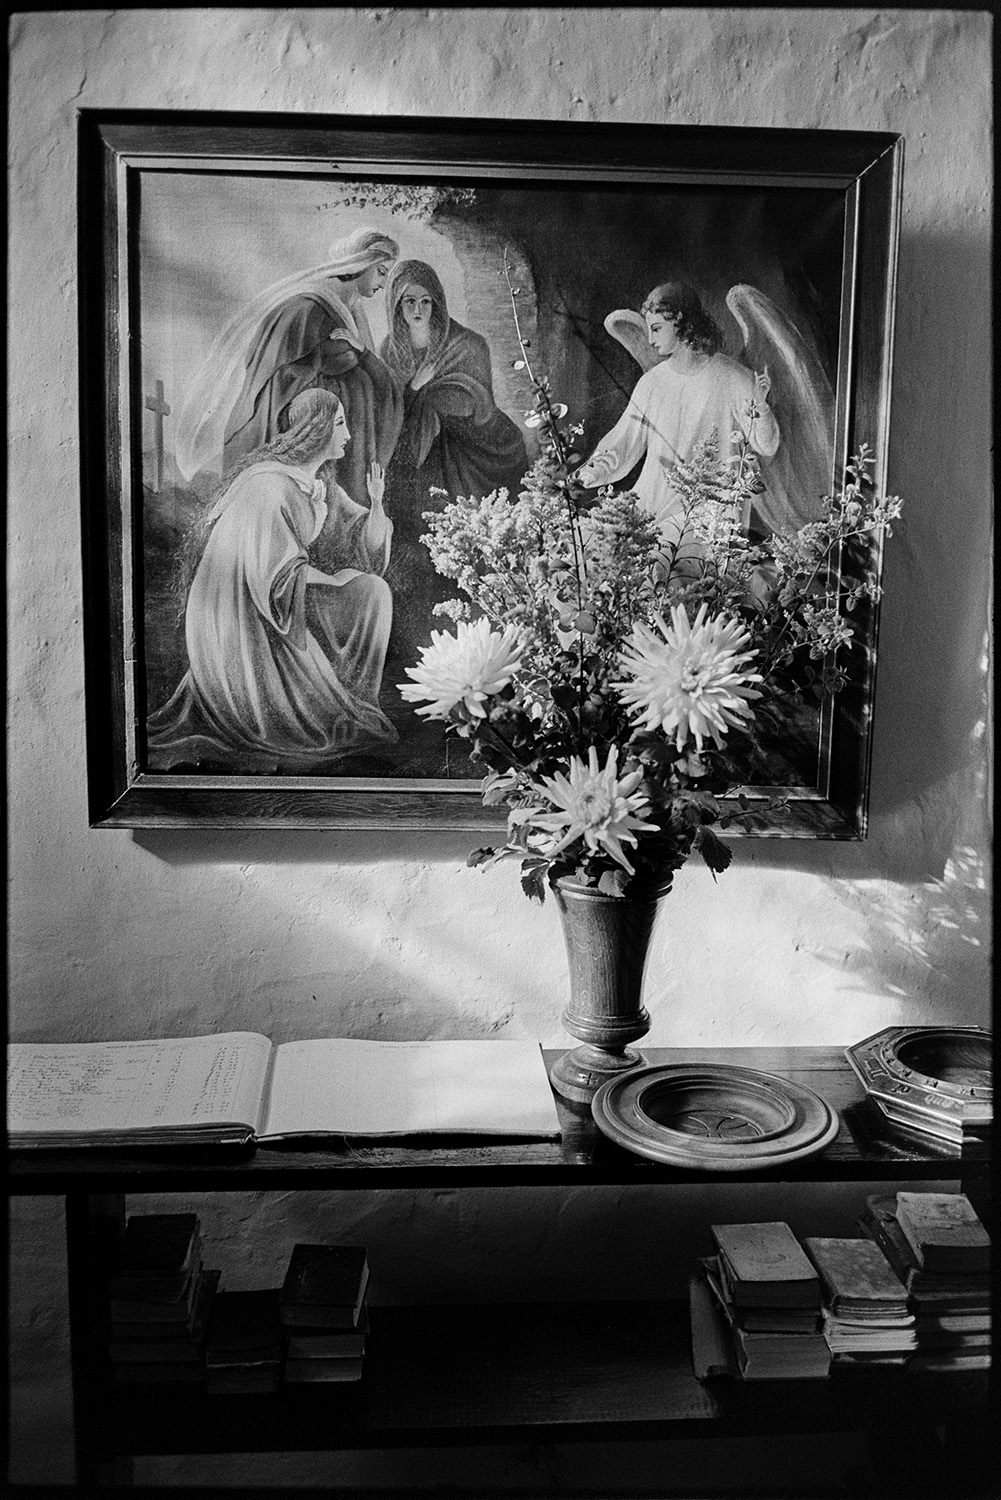 People coming out of church vicar saying hello and goodbye. Clothes.
[Interior of the Church of St. Peter, Dowland, showing a religious painting mounted on wall behind a vase of flowers standing on a bookshelf, with an open ledger book, offertory dishes and books. The scene is lit by sunlight.]